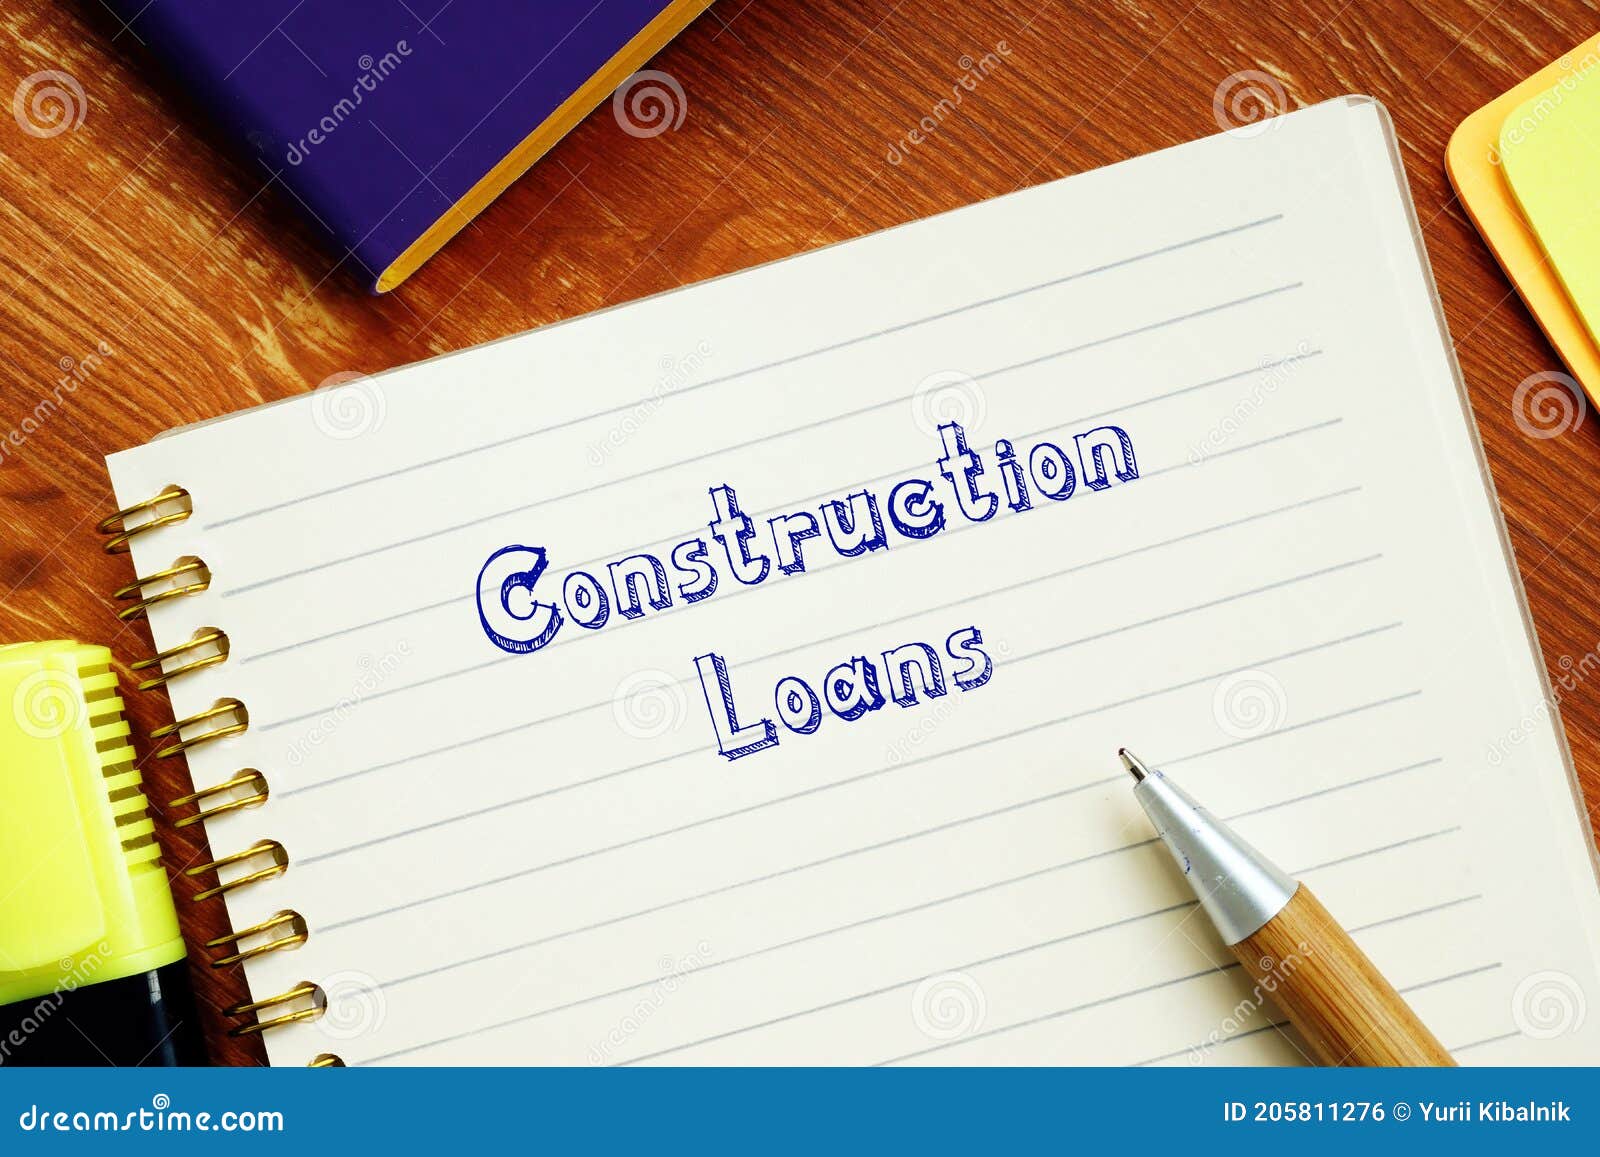 financial concept meaning construction loans with inscription on the page